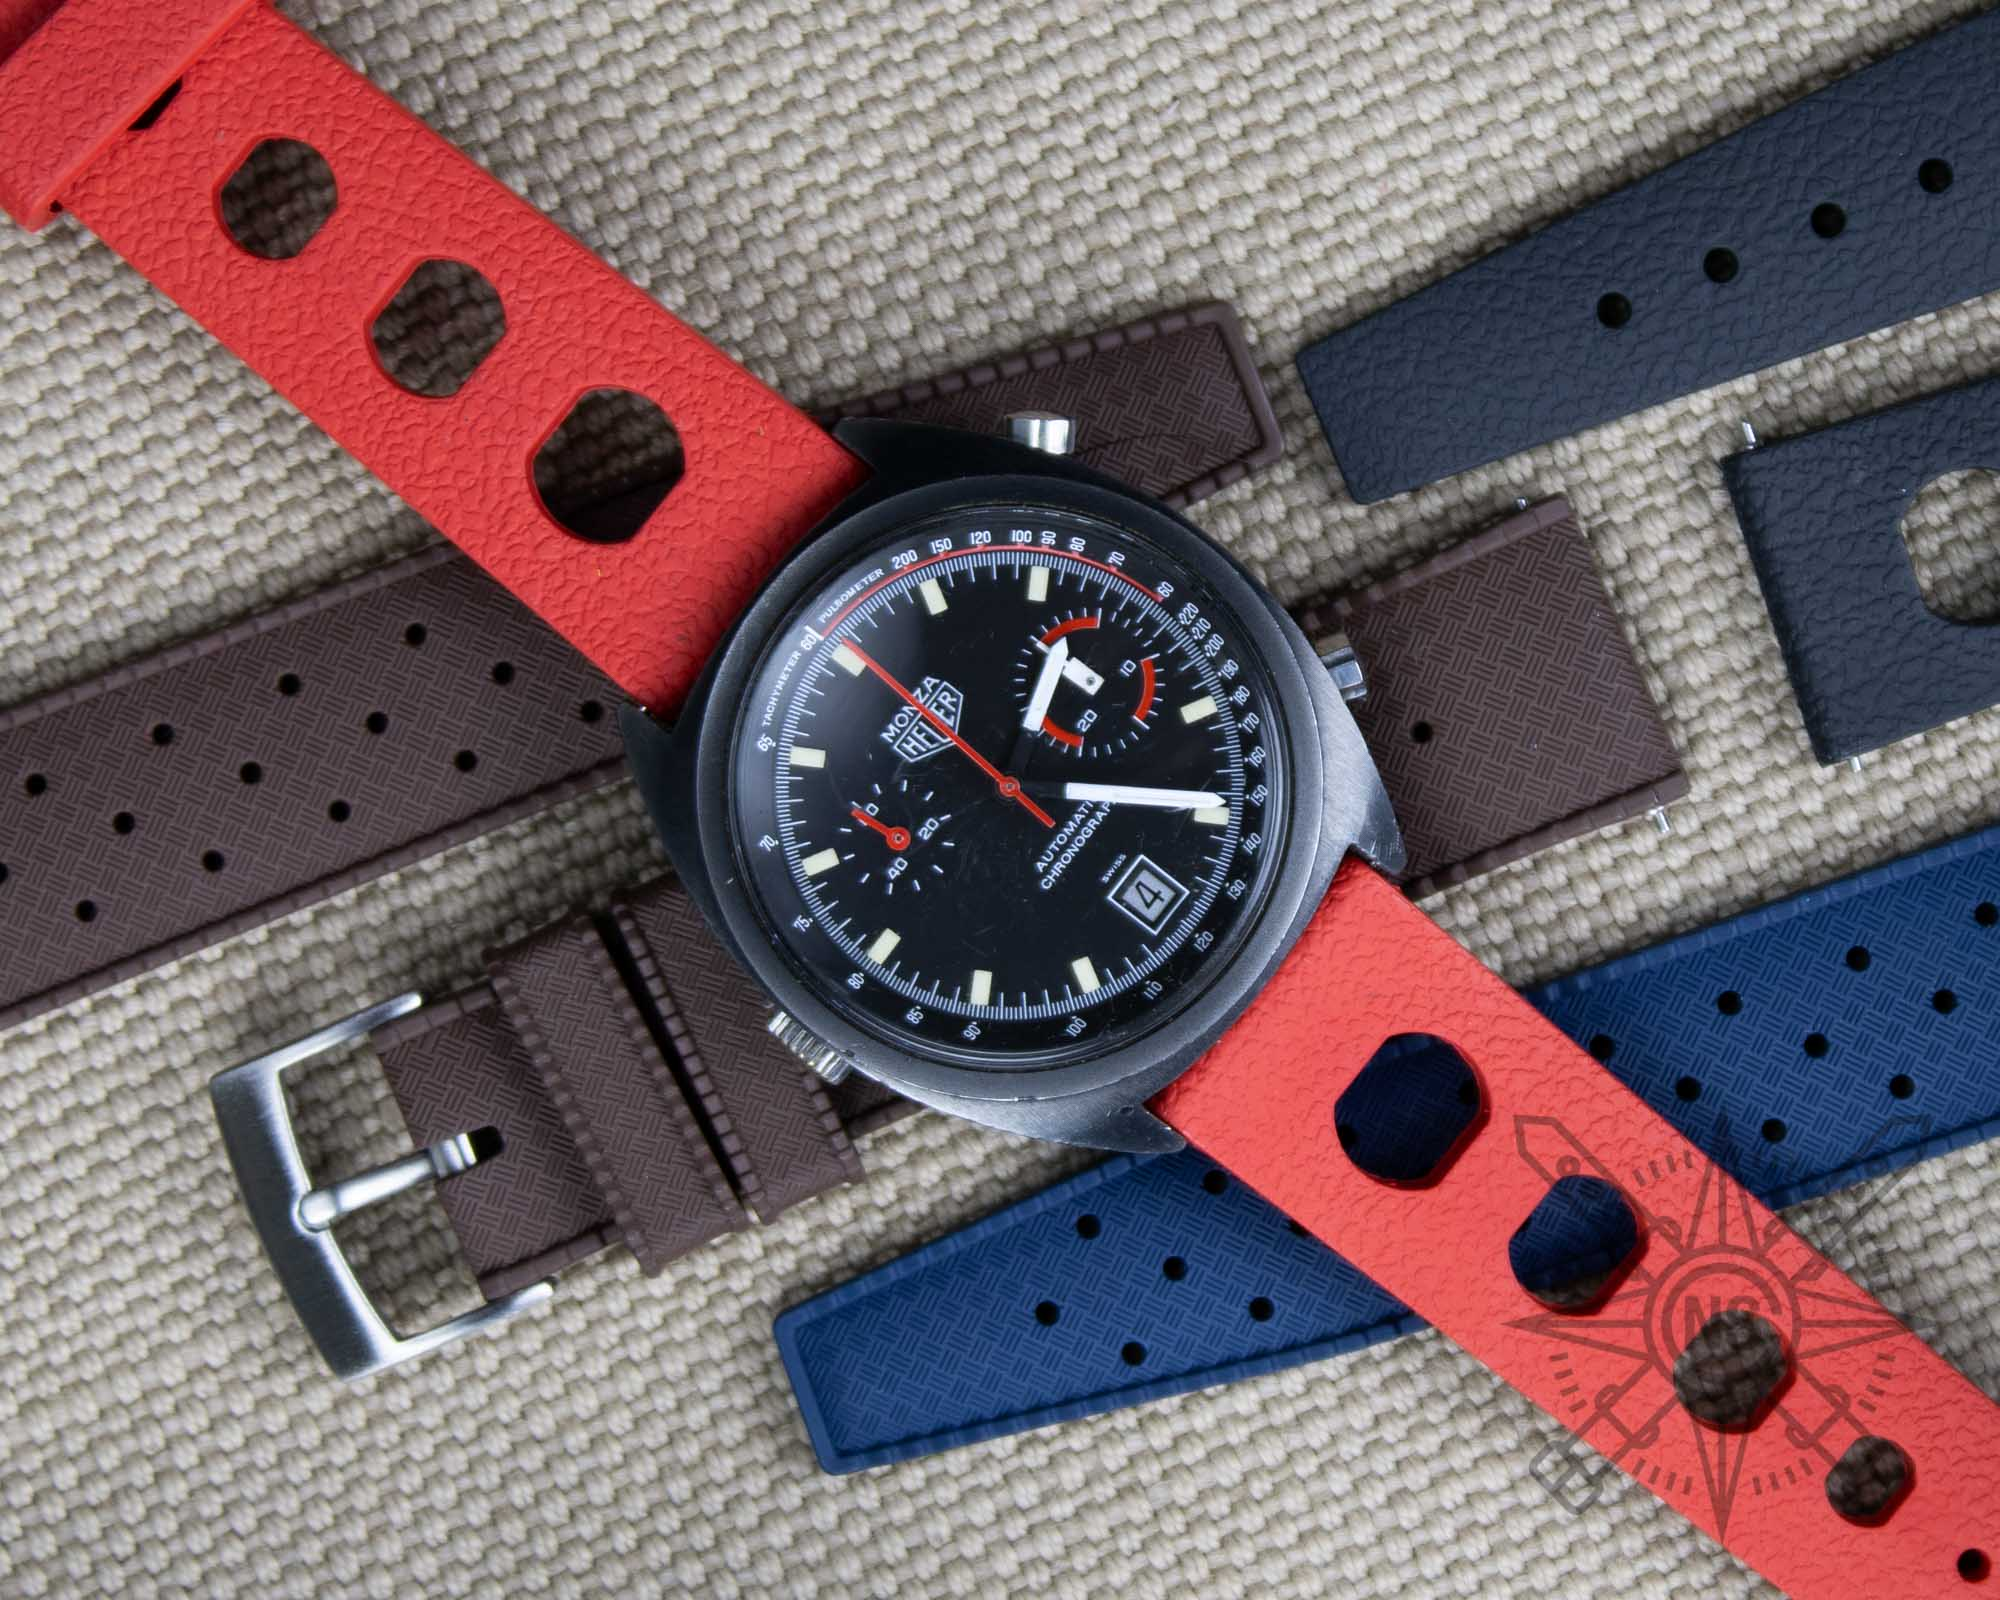 Choosing the right Tropic strap for your watch